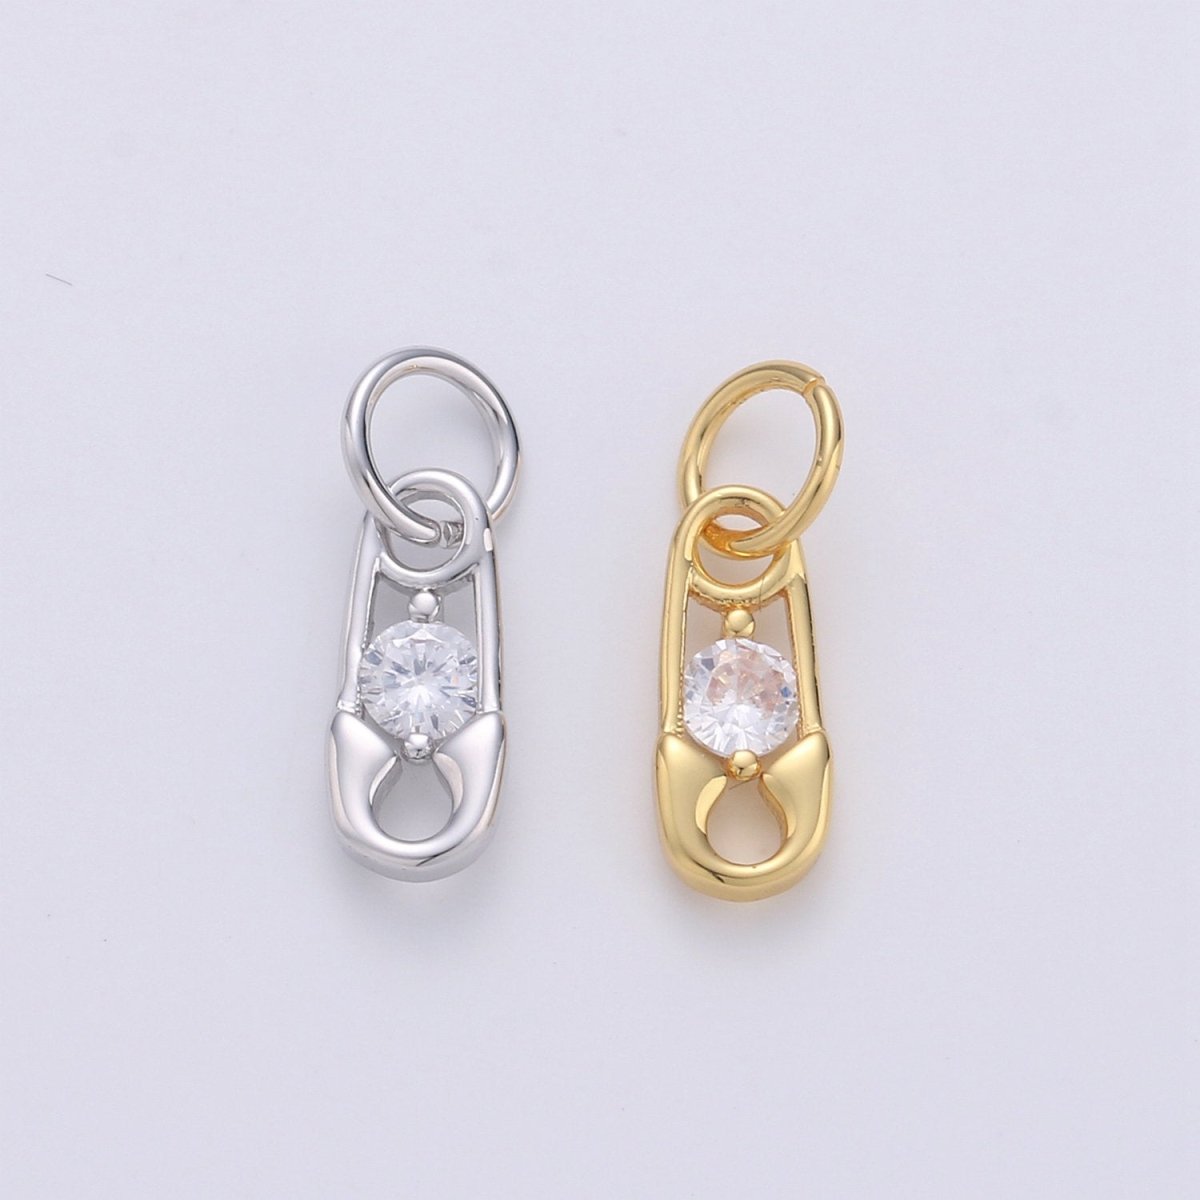 Mini Safety Pin Charm in 24K Gold Filled for Necklace Bracelet Earring Supply D-556 D-557 - DLUXCA